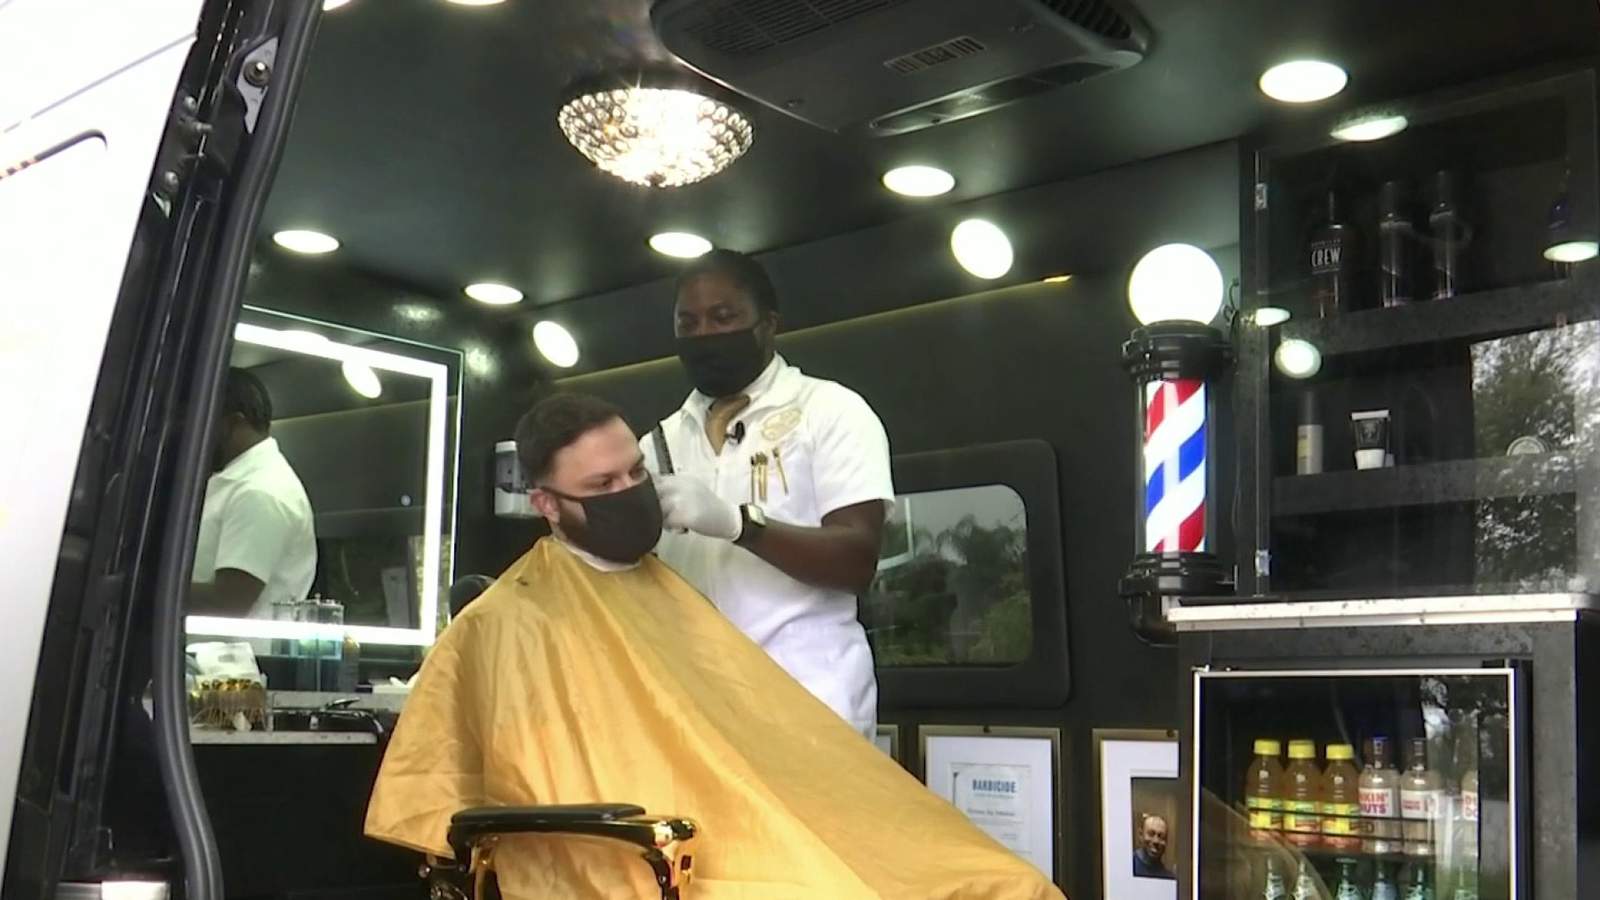 West Orange County barber adapts during pandemic to mobile barbershop